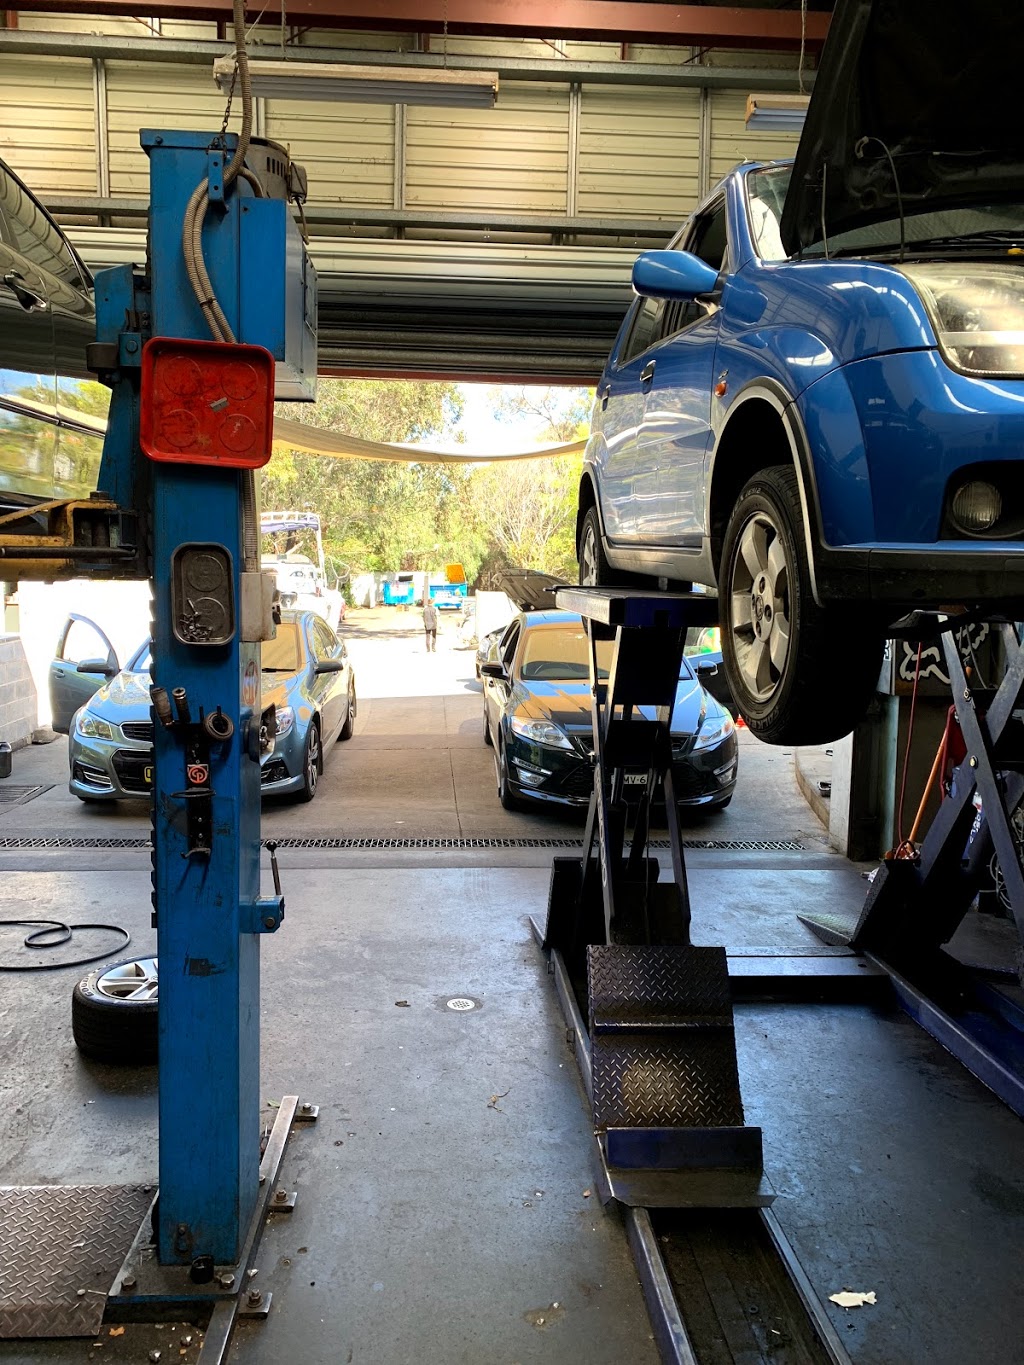 A.D. Car Care | car repair | 3 Windsor Rd rear of caltex and, repco, Kellyville NSW 2155, Australia | 0296293679 OR +61 2 9629 3679